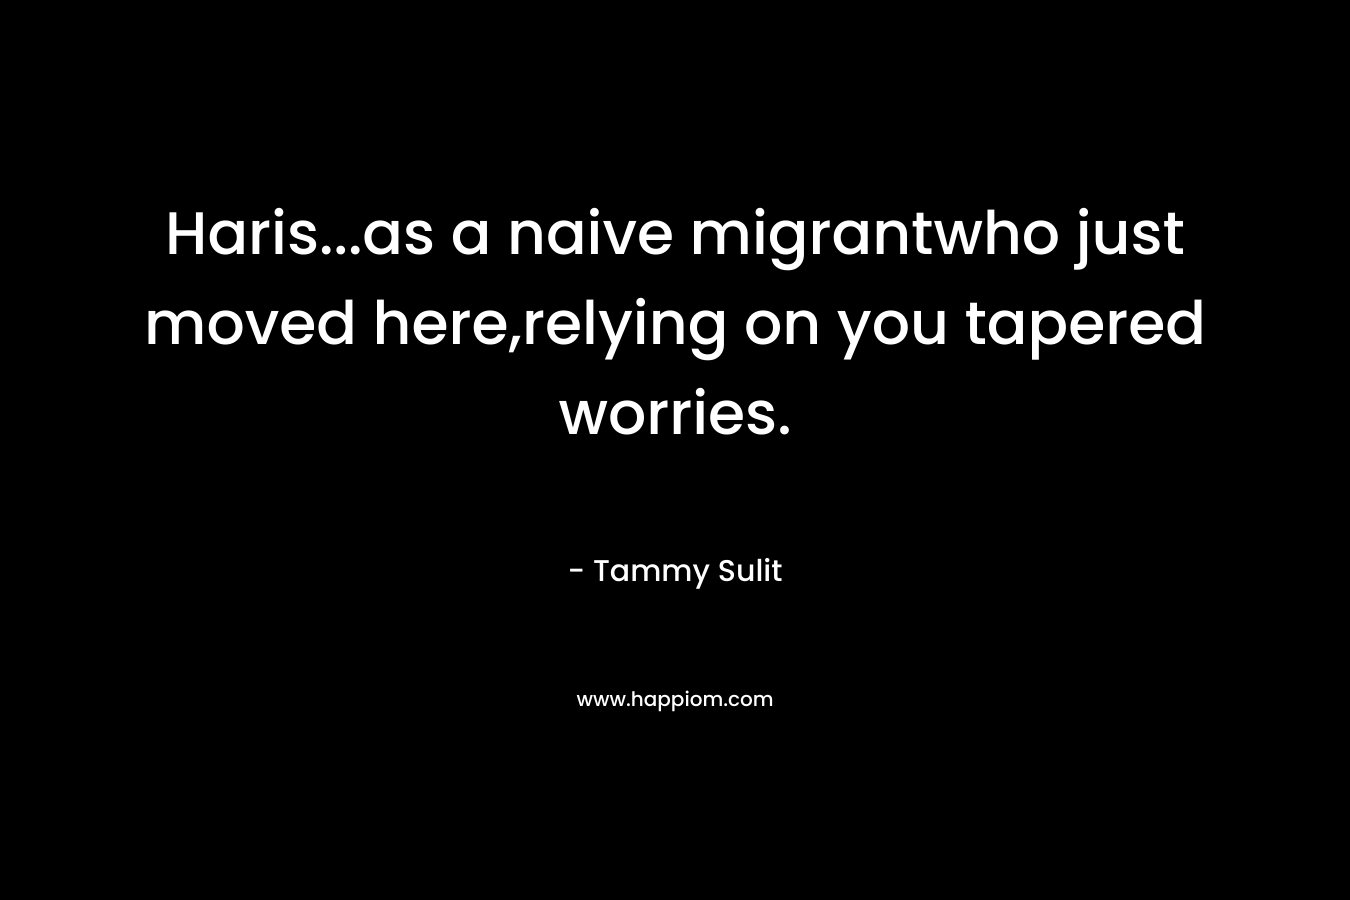 Haris...as a naive migrantwho just moved here,relying on you tapered worries.